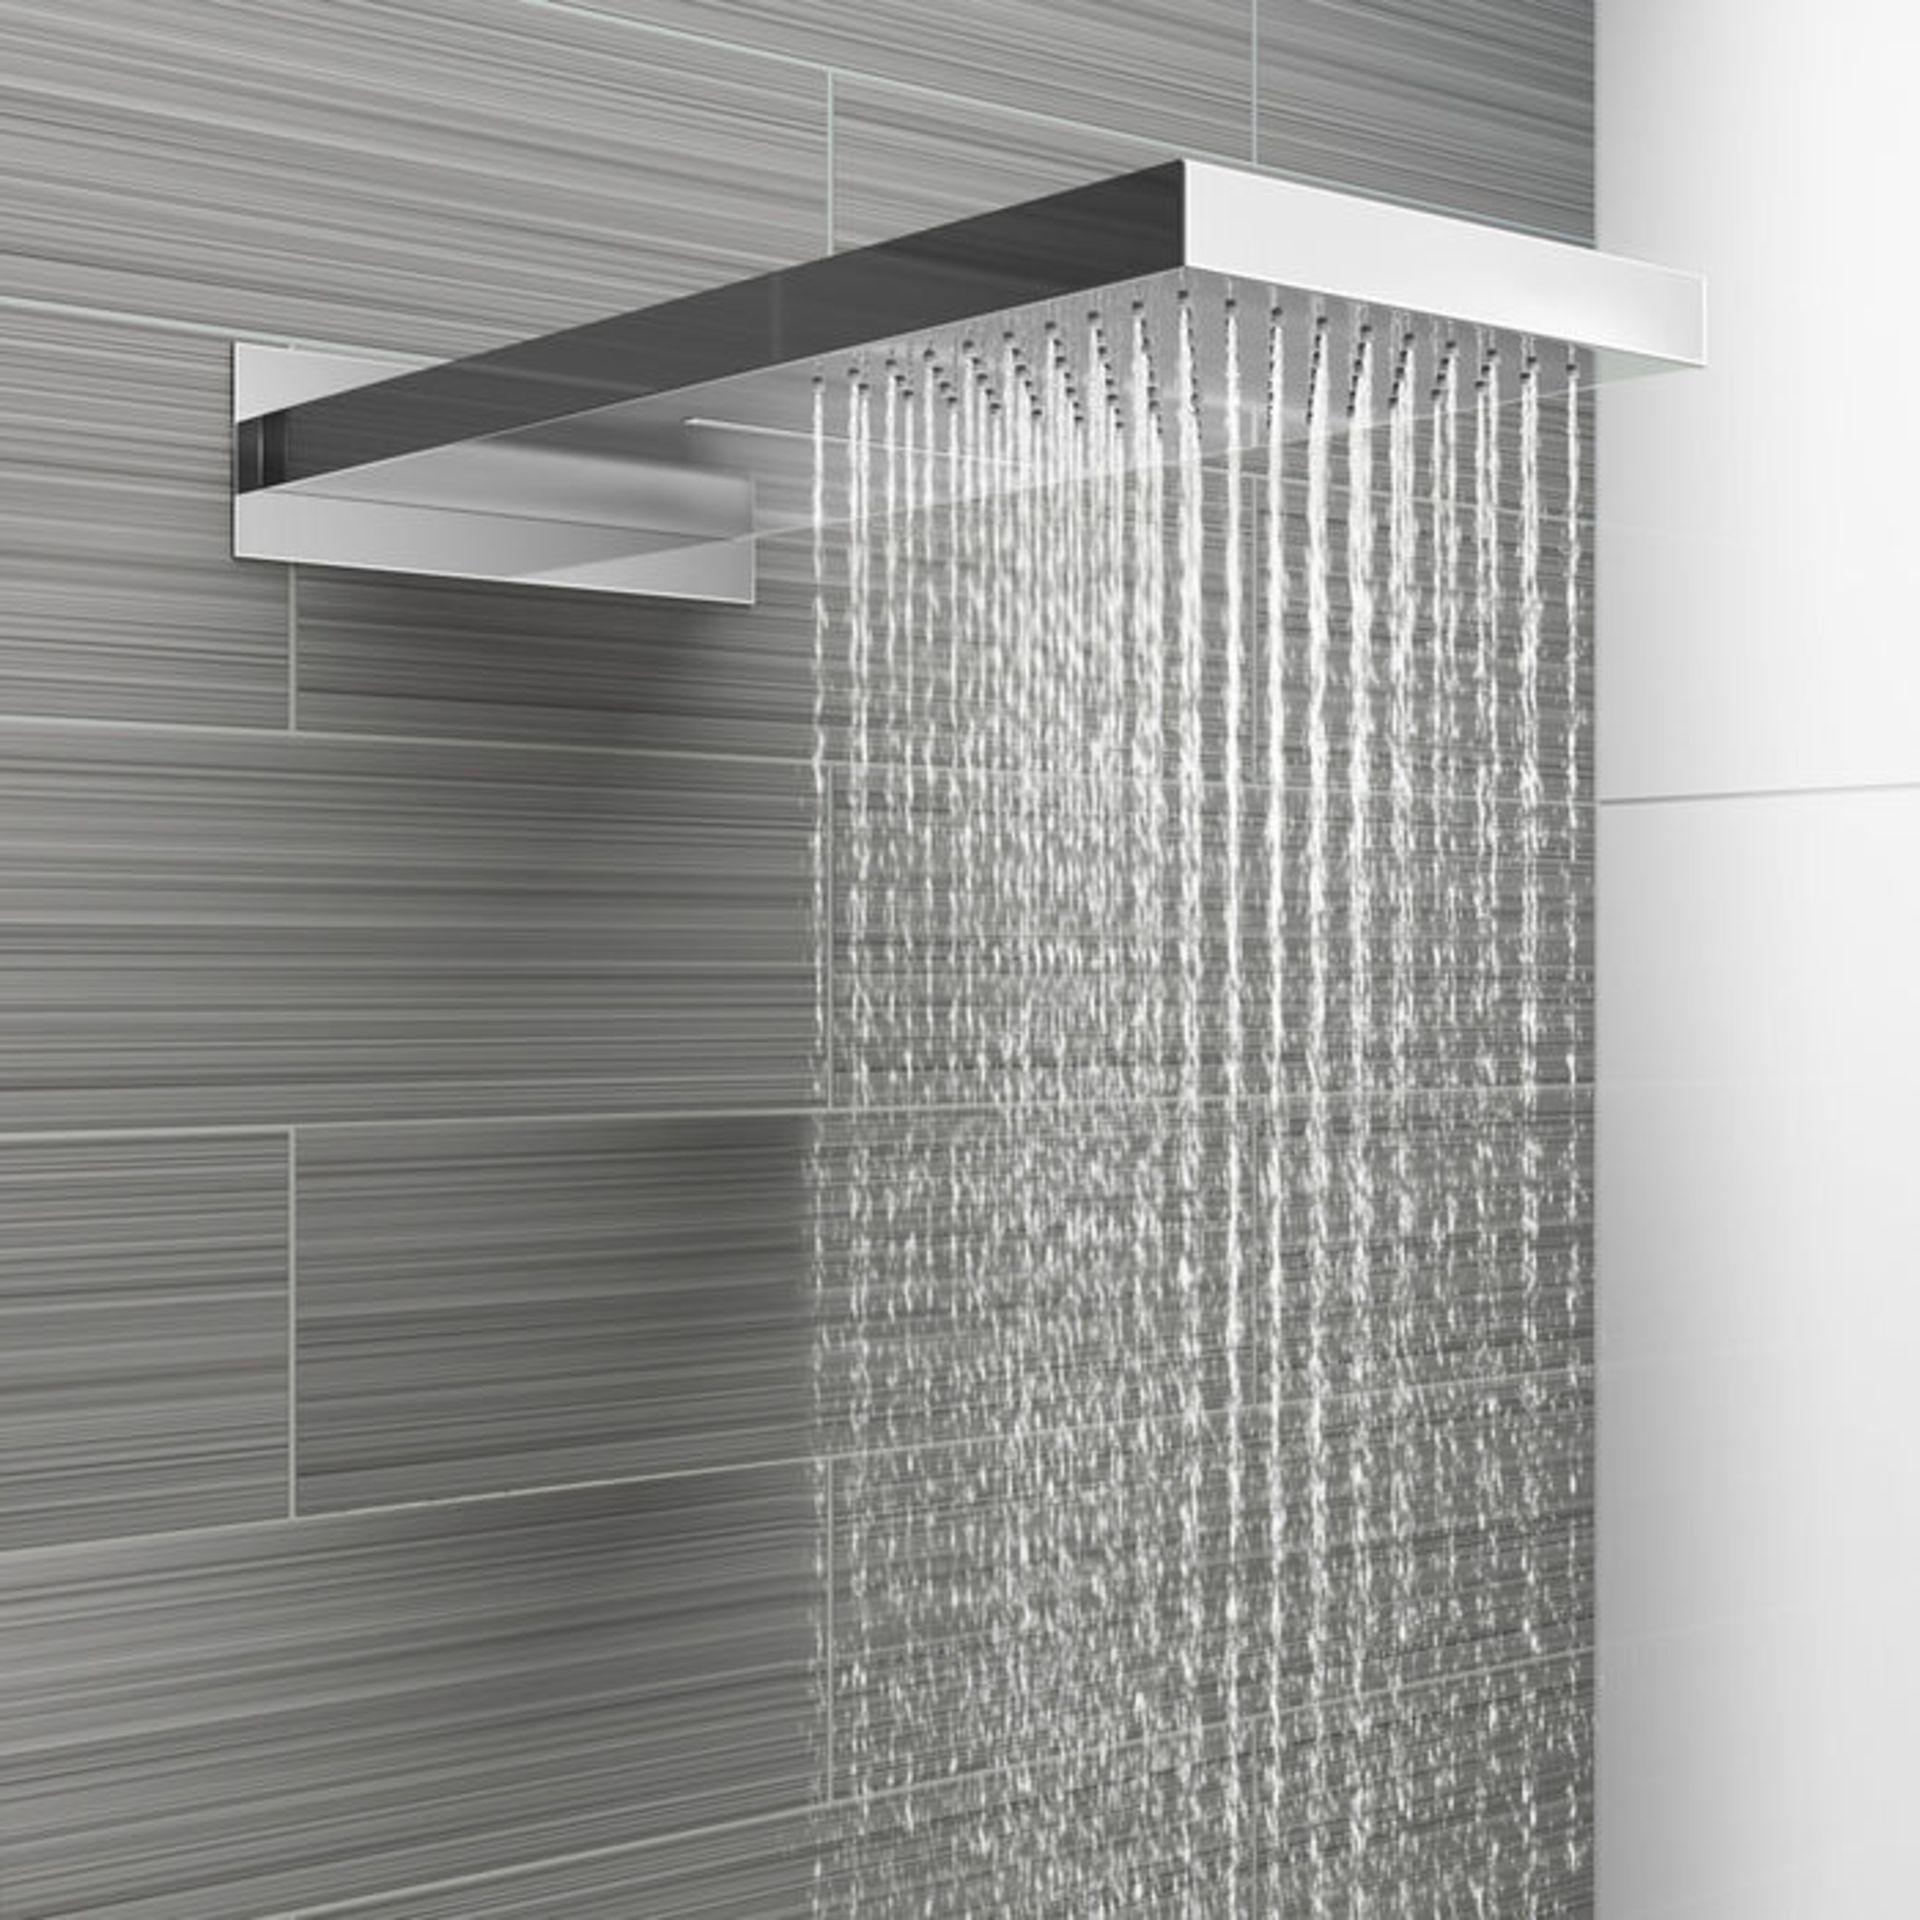 (TA43) Stainless Steel 230x500mm Waterfall Shower Head. RRP £374.99. Dual function waterfall and - Image 3 of 6